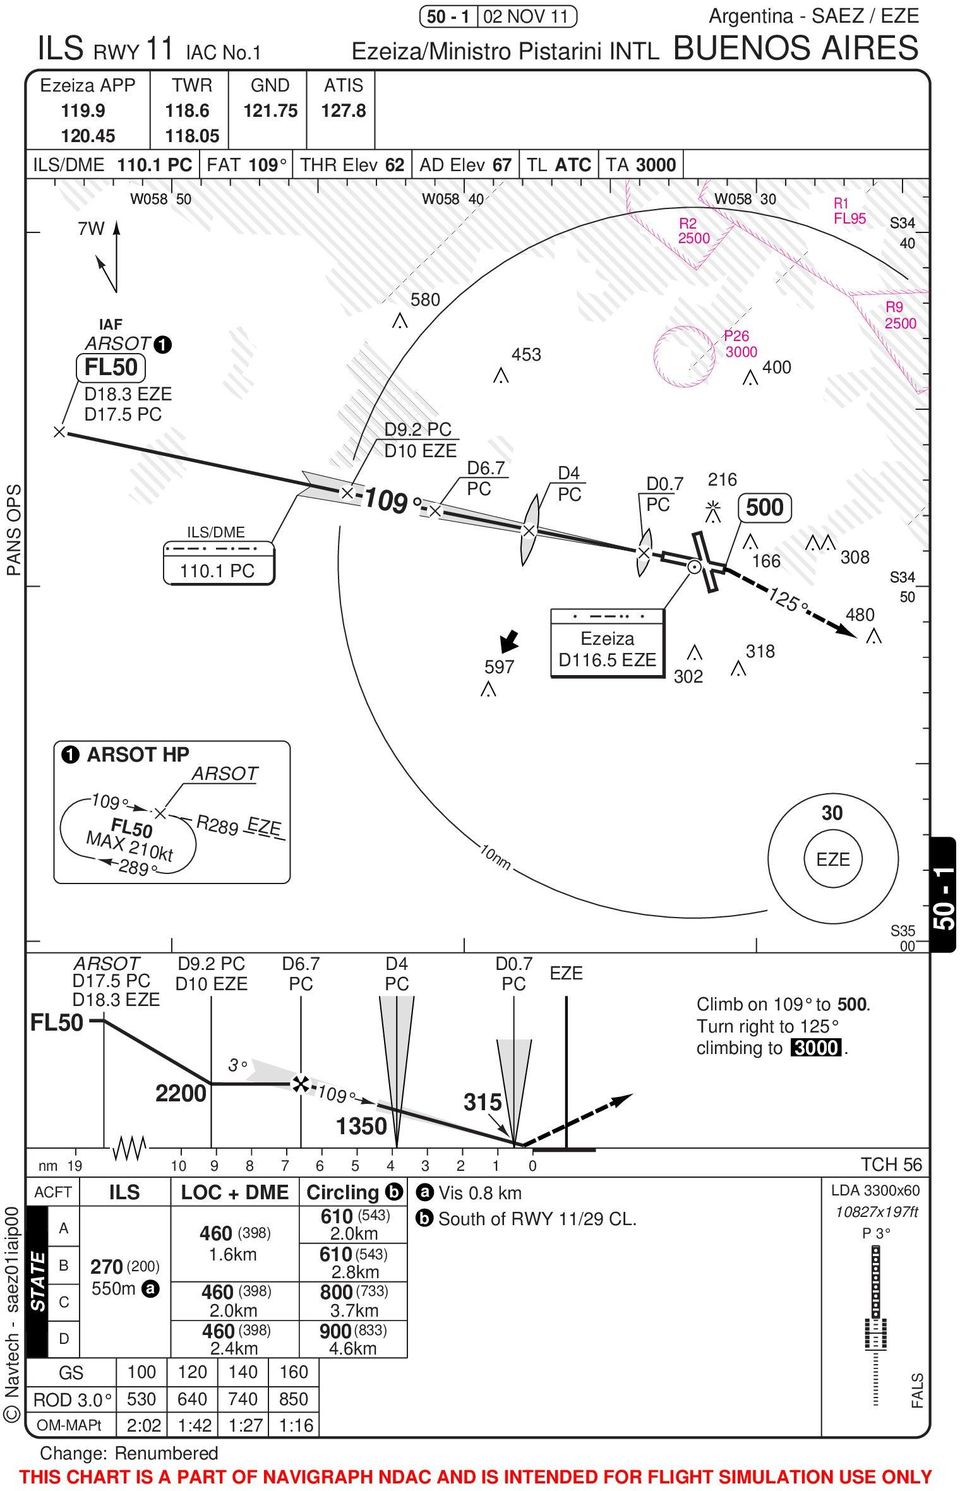 7 7 09 6 350 5 4 4 3 2 0nm 35 0.7 0 limb on 09 to 500. Turn right to 25 climbing to 00. S35 00 TH 56 FT ILS LO + ME ircling b a Vis 0.8 km L 30x60 60 (543) b 0827x97ft South of RWY /29 L.